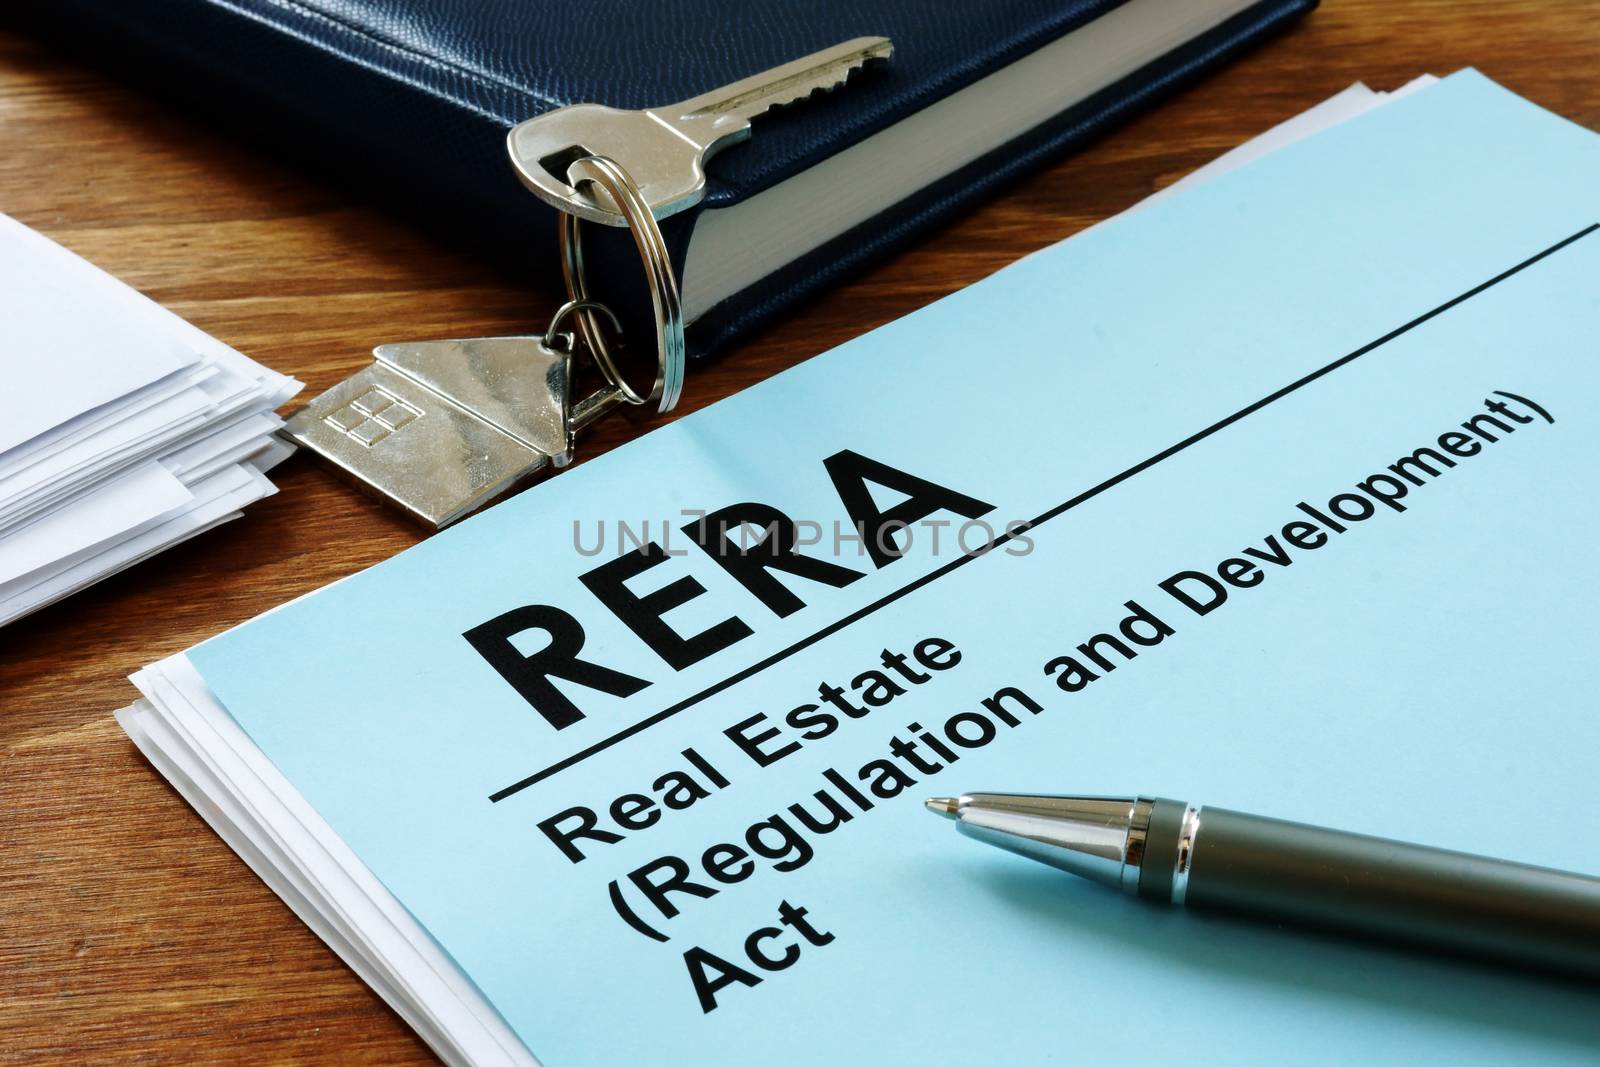 RERA or Real Estate Regulation and Development Act on the desk and key. by designer491